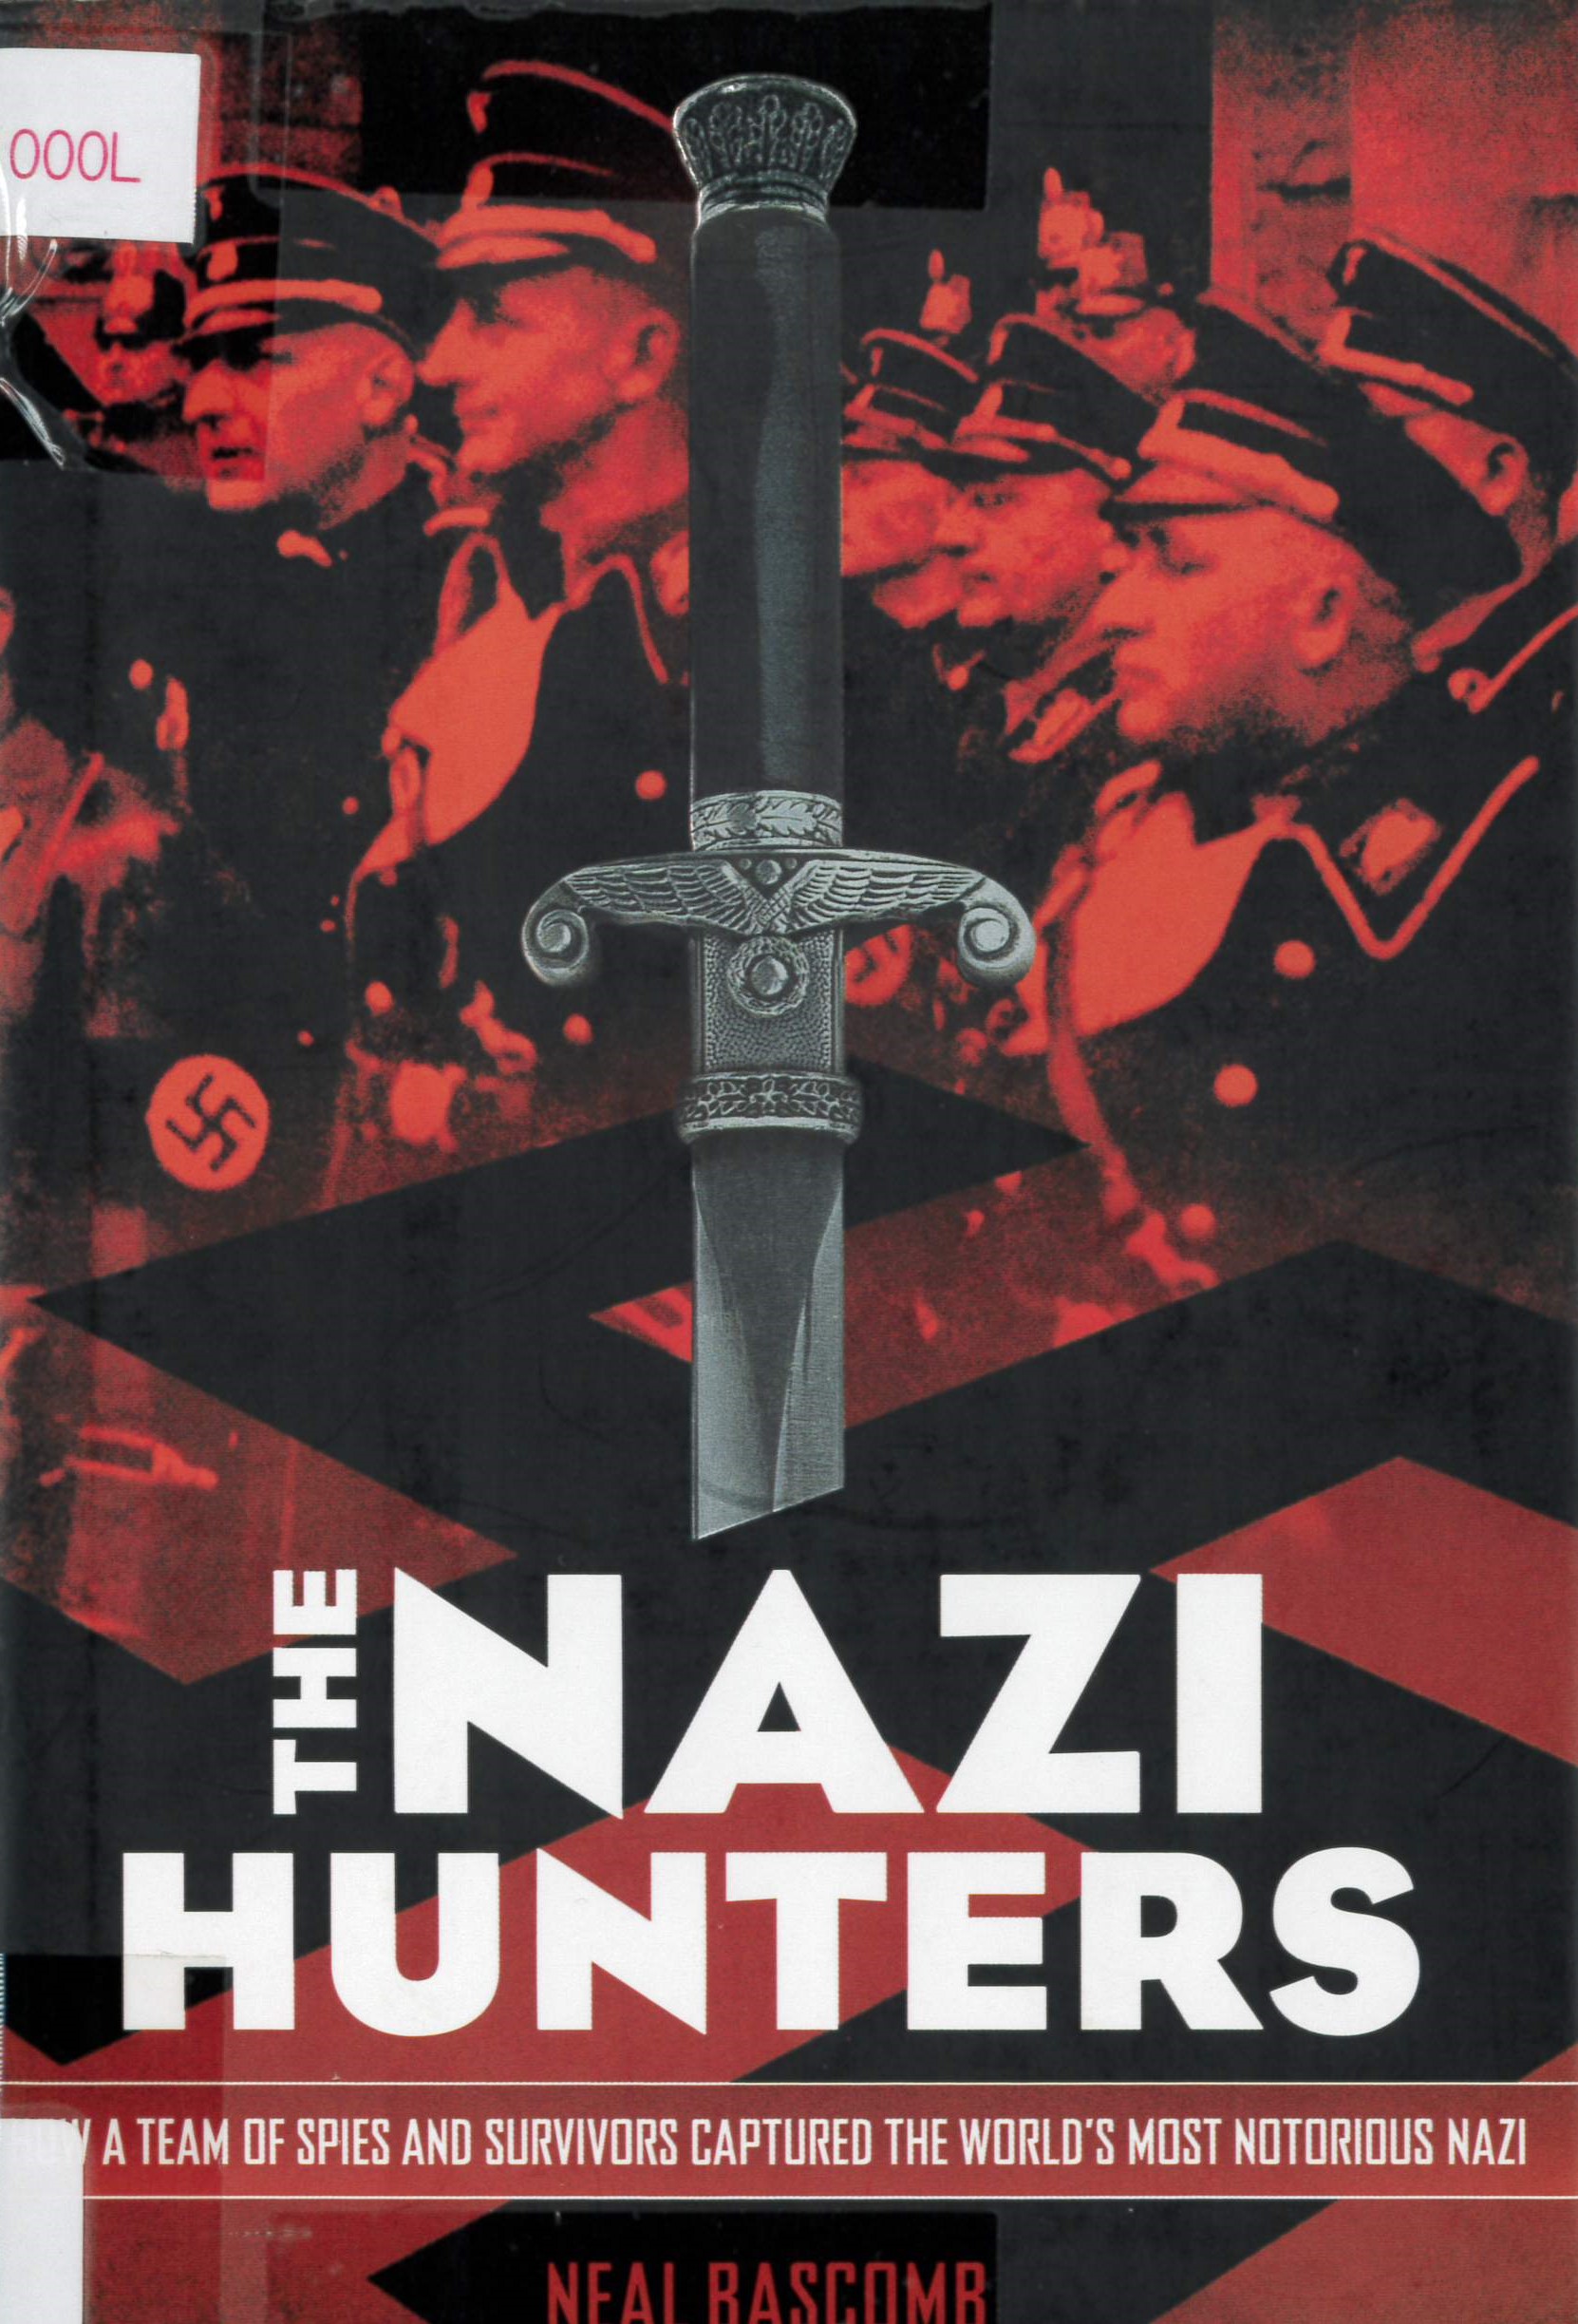 The Nazi hunters how a team of spies and survivors captured the world